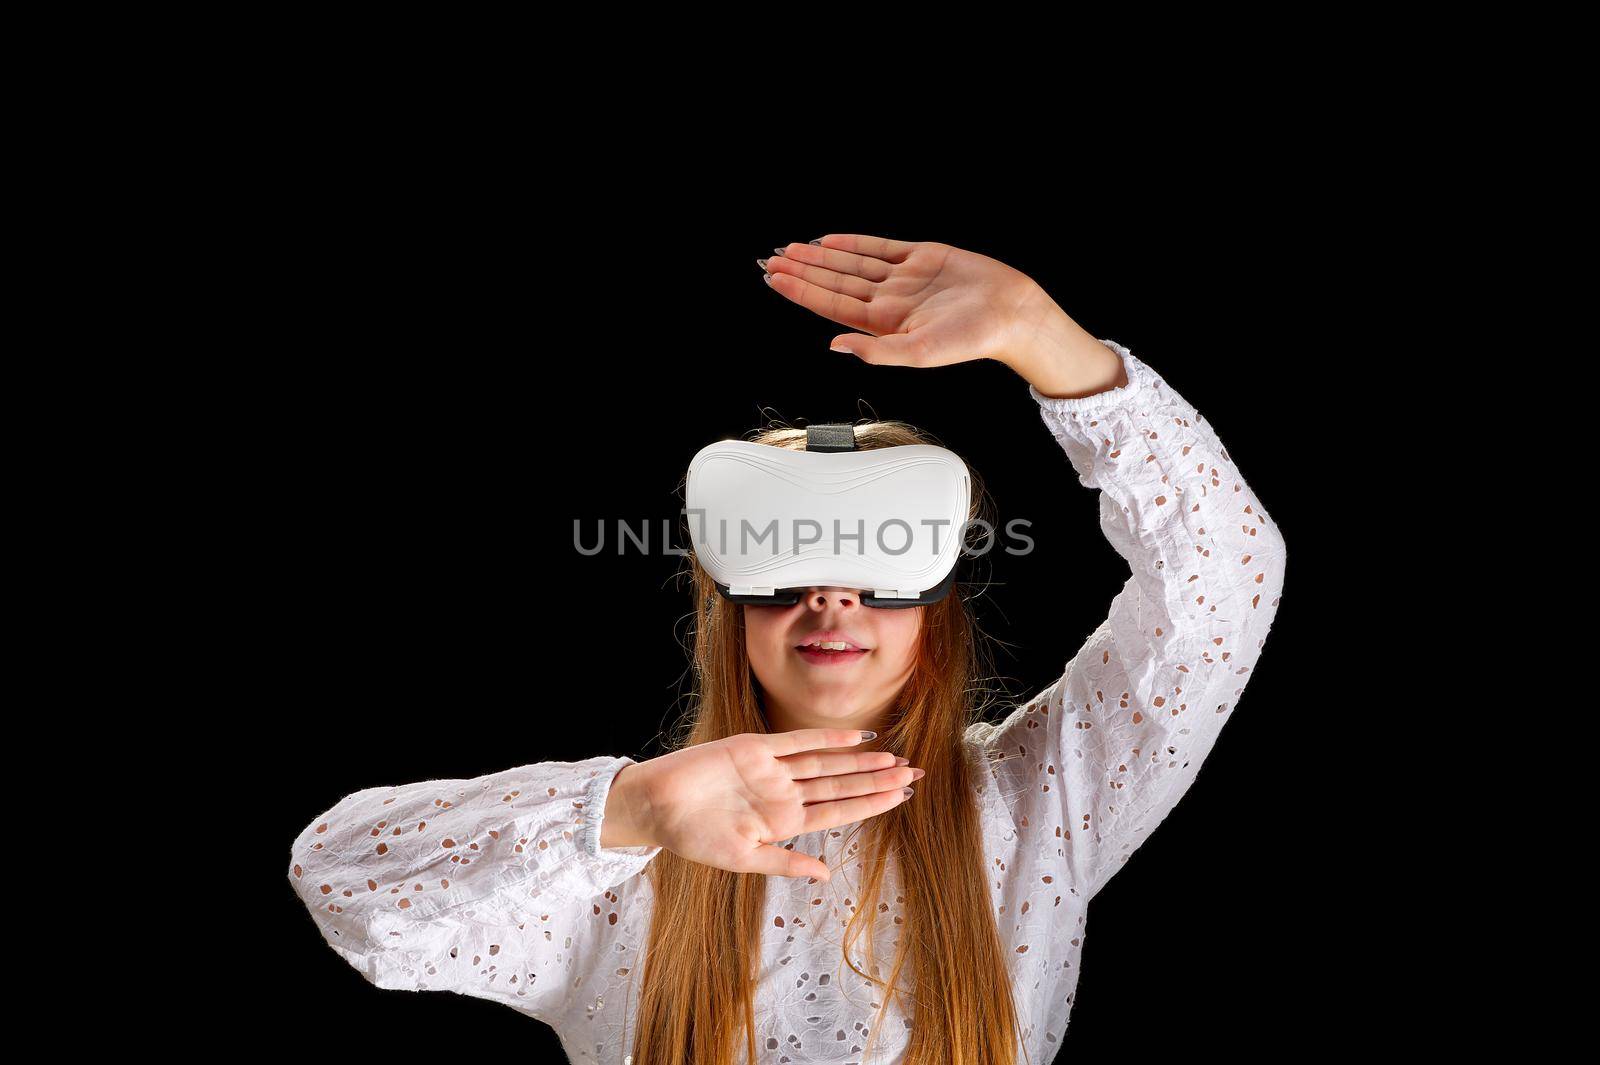 Young woman in white shirt and jeans wearing virtual helmet. Woman standing with folded hands. by PhotoTime